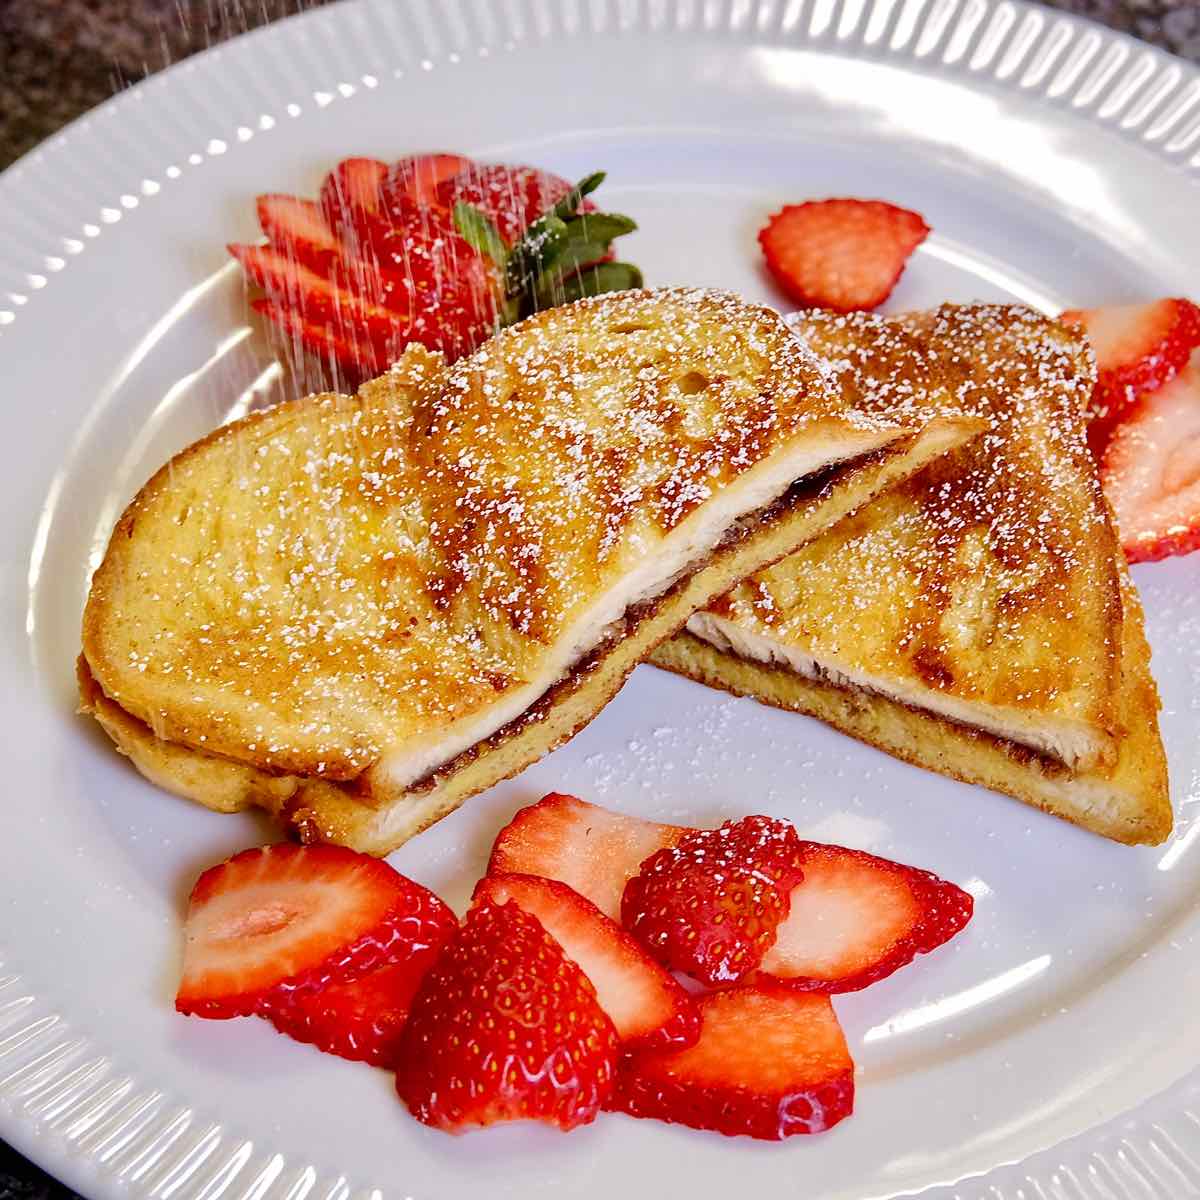 Nutella and Mascarpone Stuffed French Toast served with sliced strawberries on a white plate being dusted with confectioner's sugar.